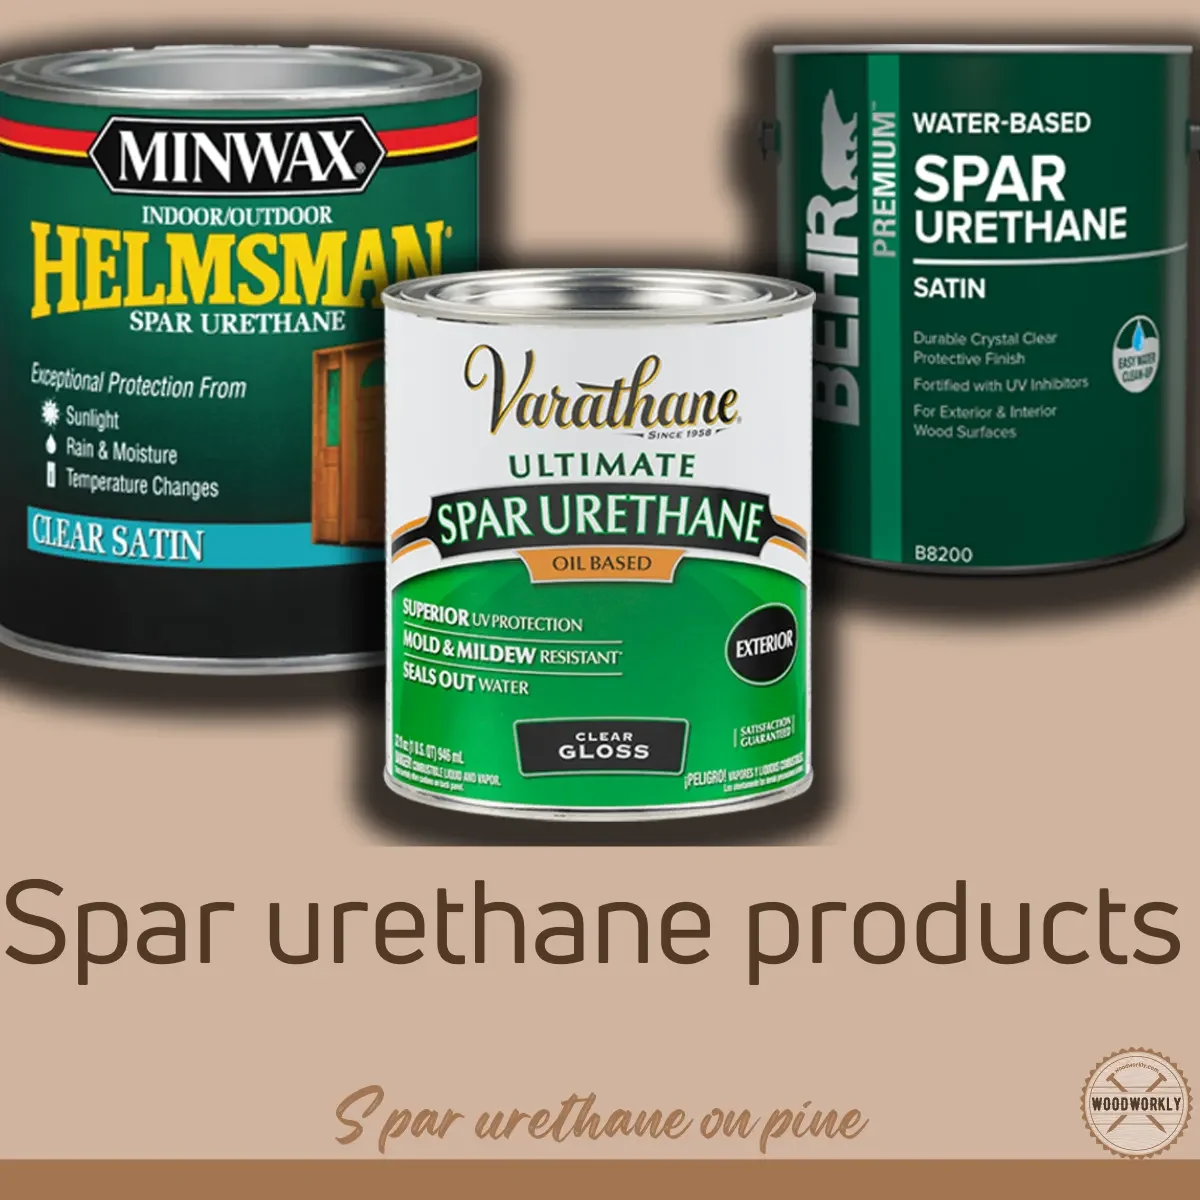 spar urethane products that can use on pine